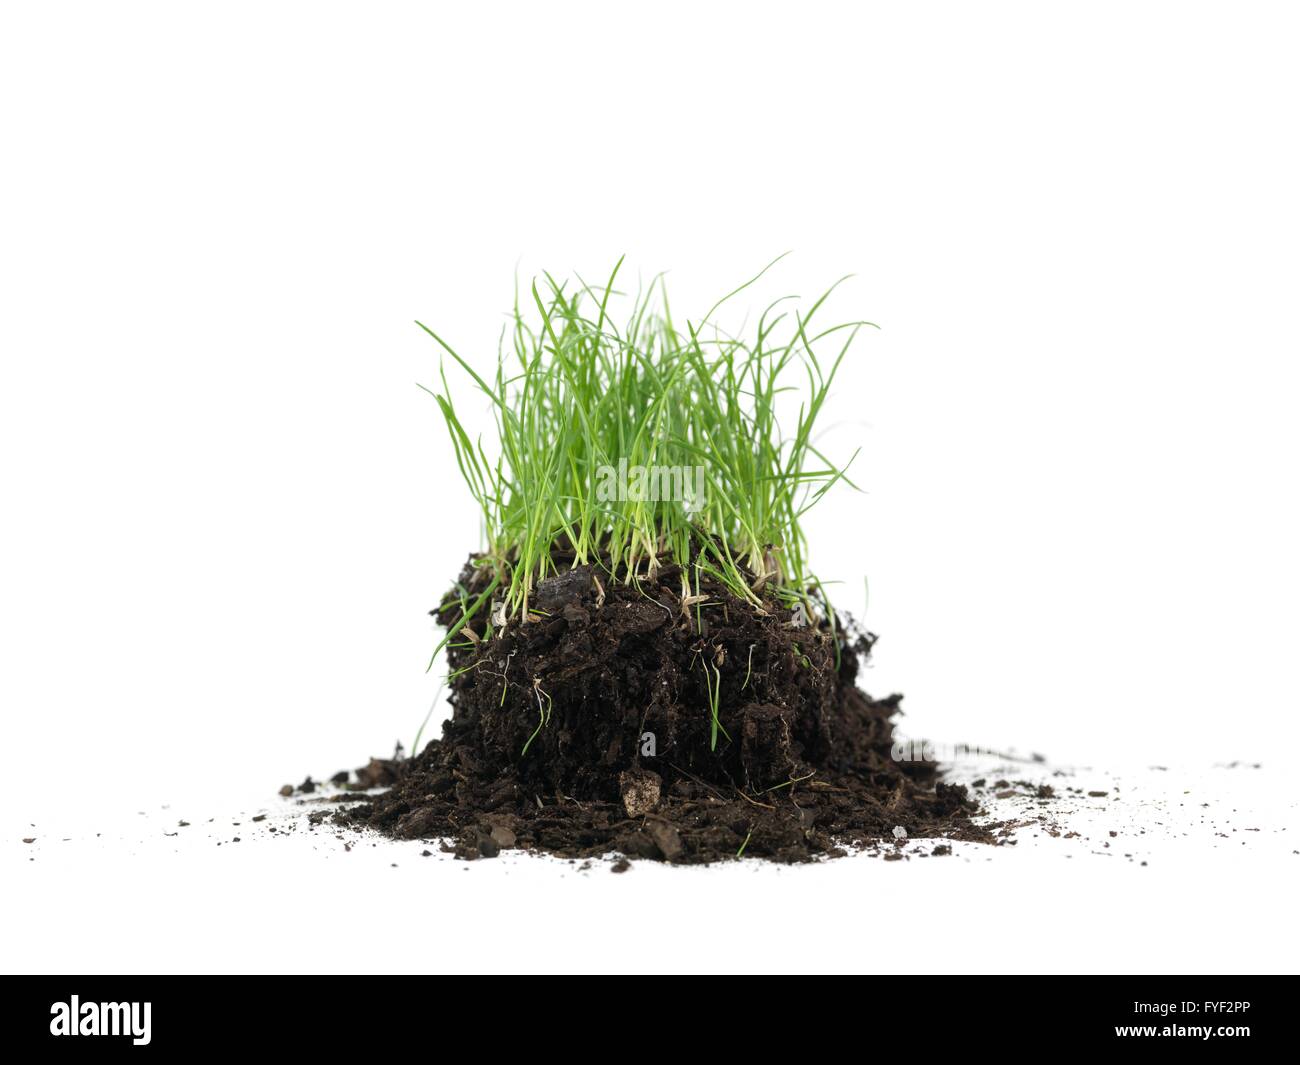 Green grass isolated against a white background Stock Photo